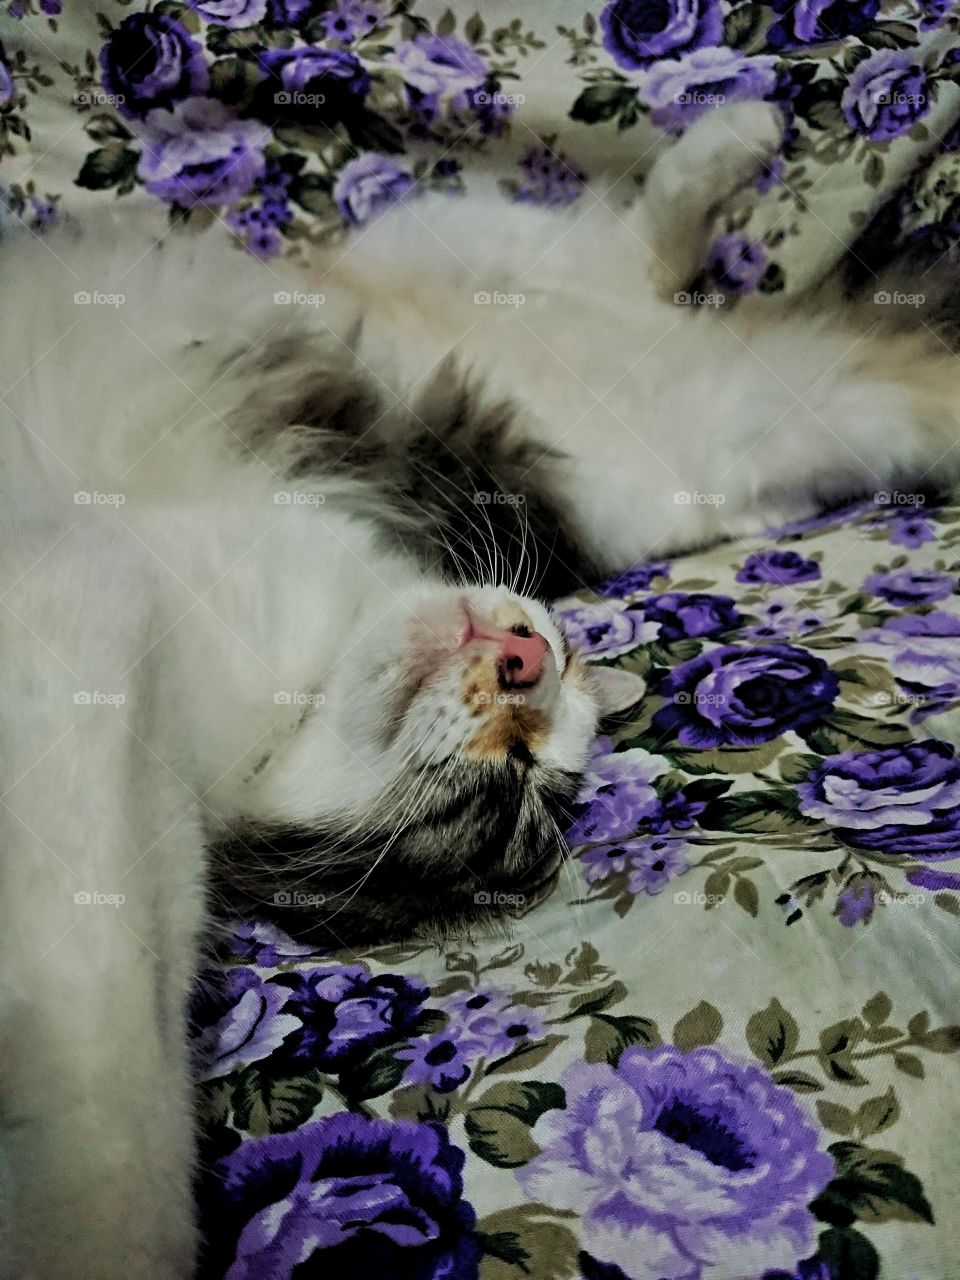 This is how most cat sleep